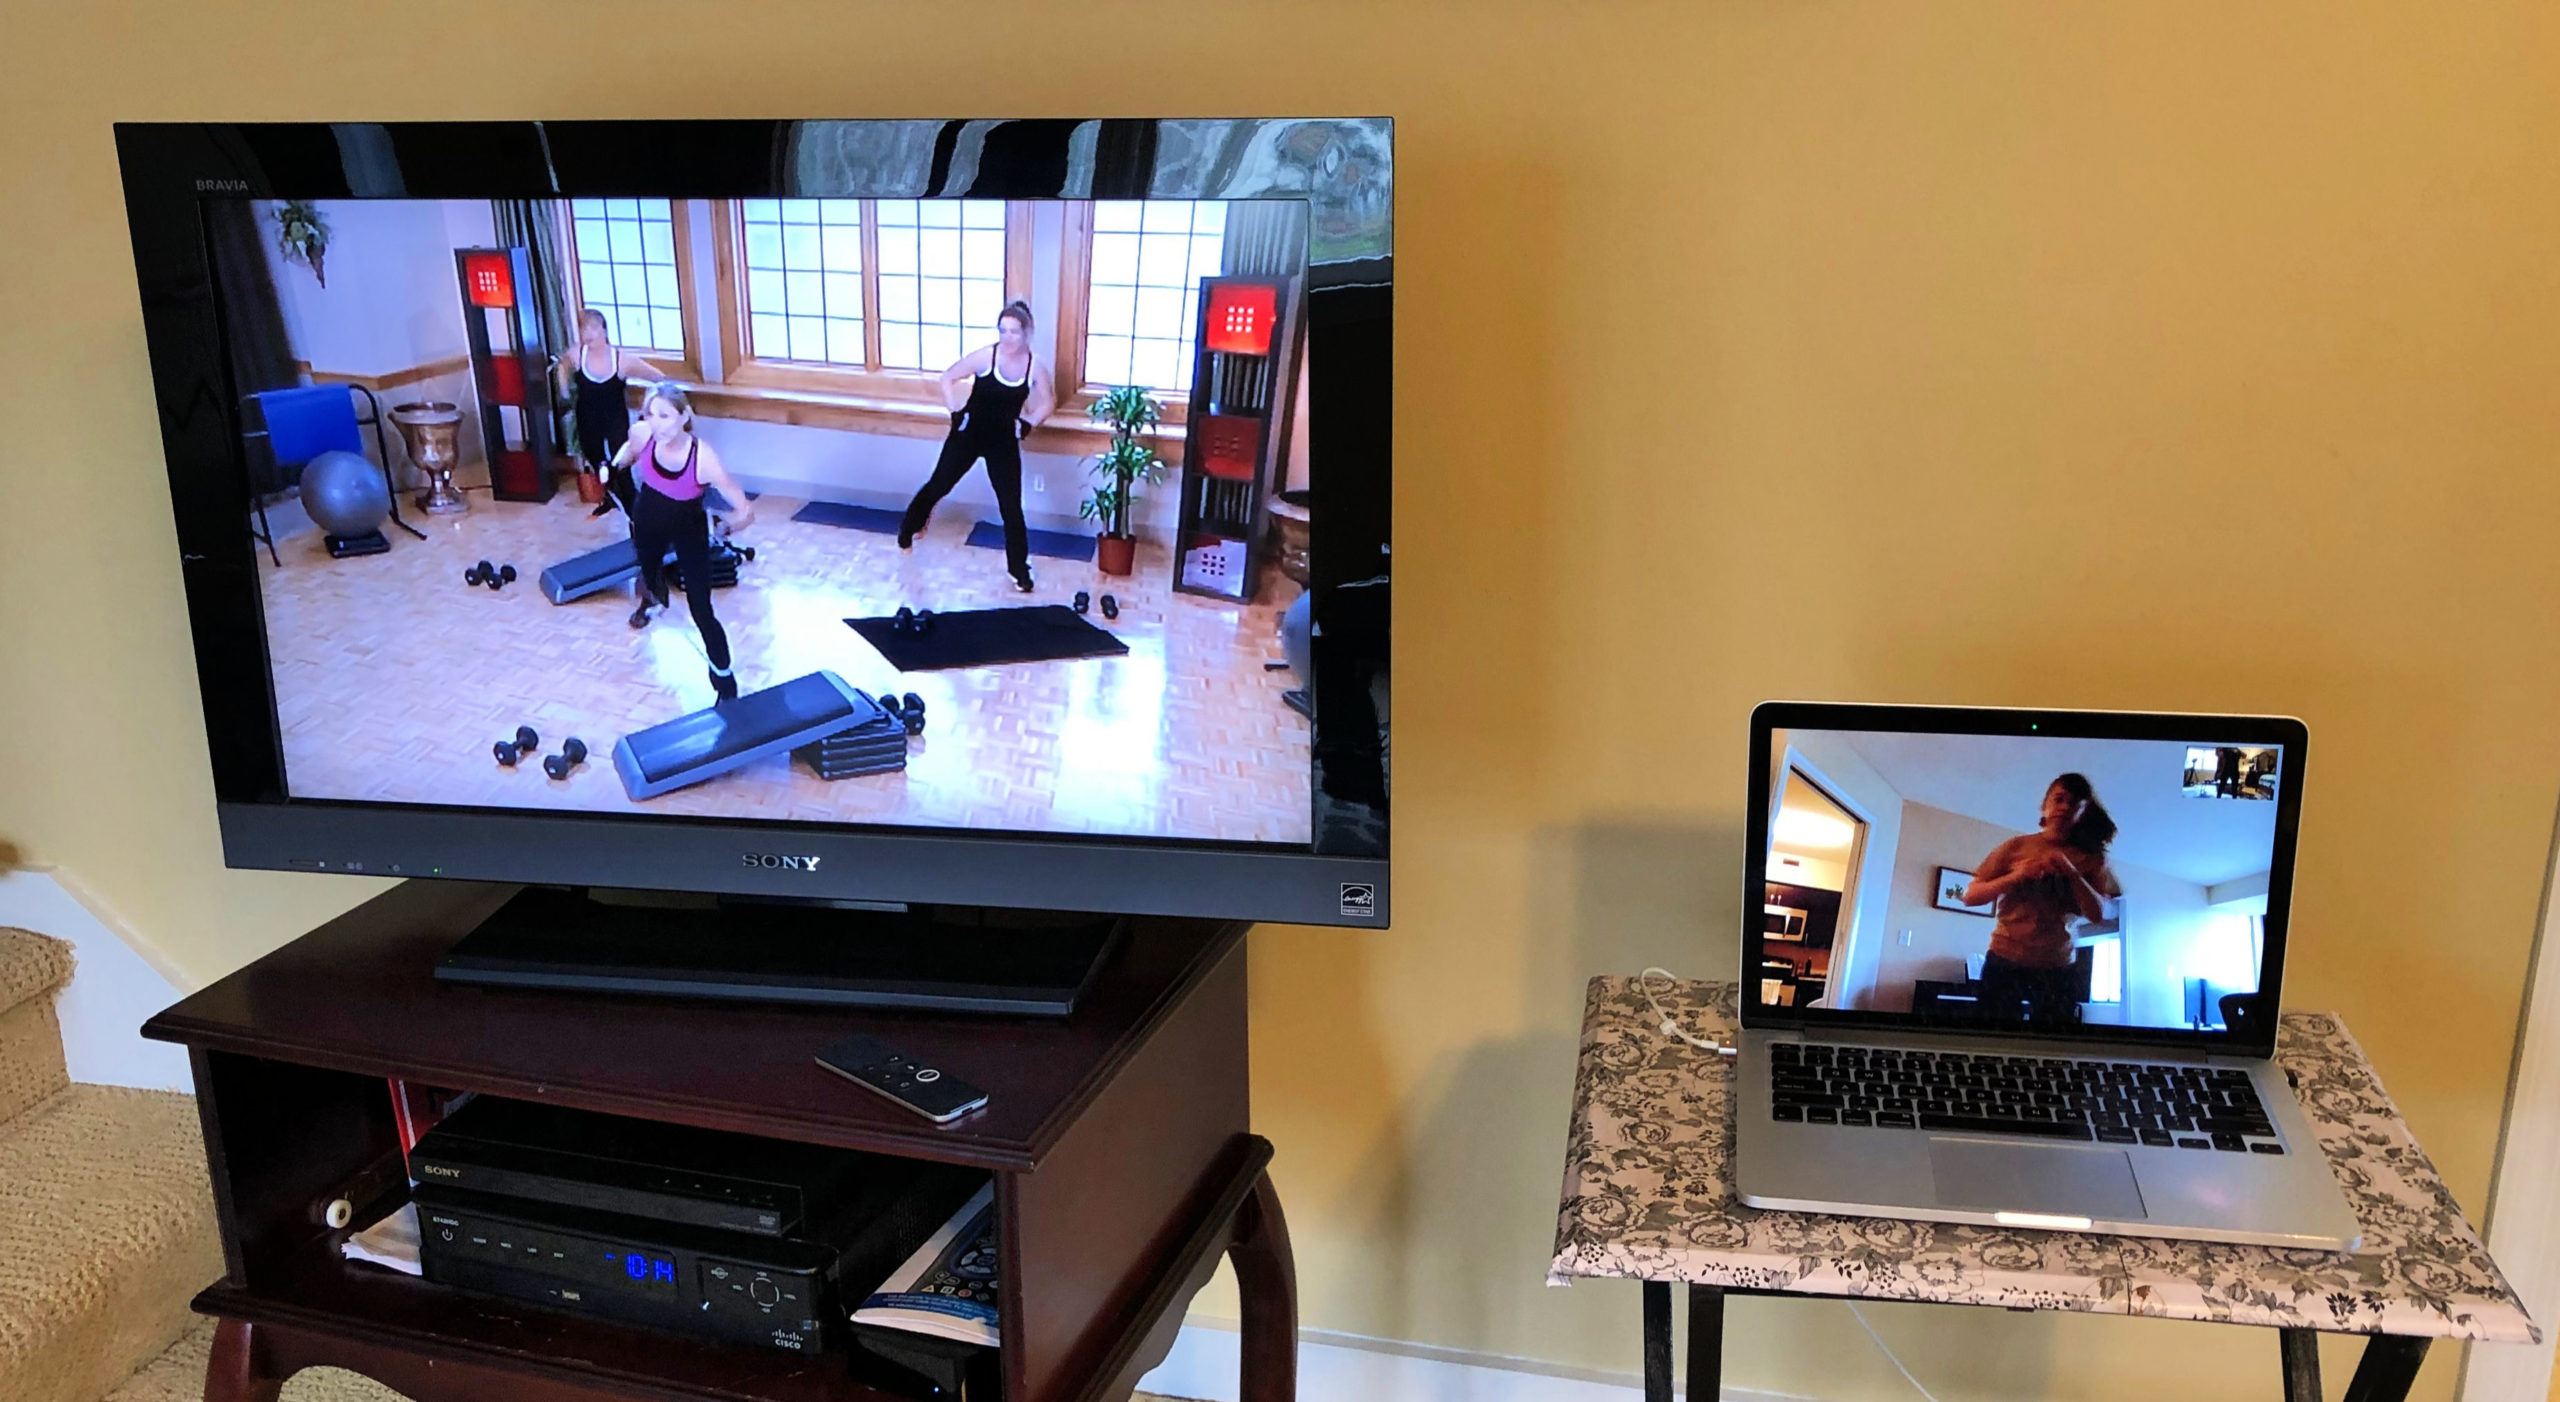 Working out at home using FaceTime and a TV